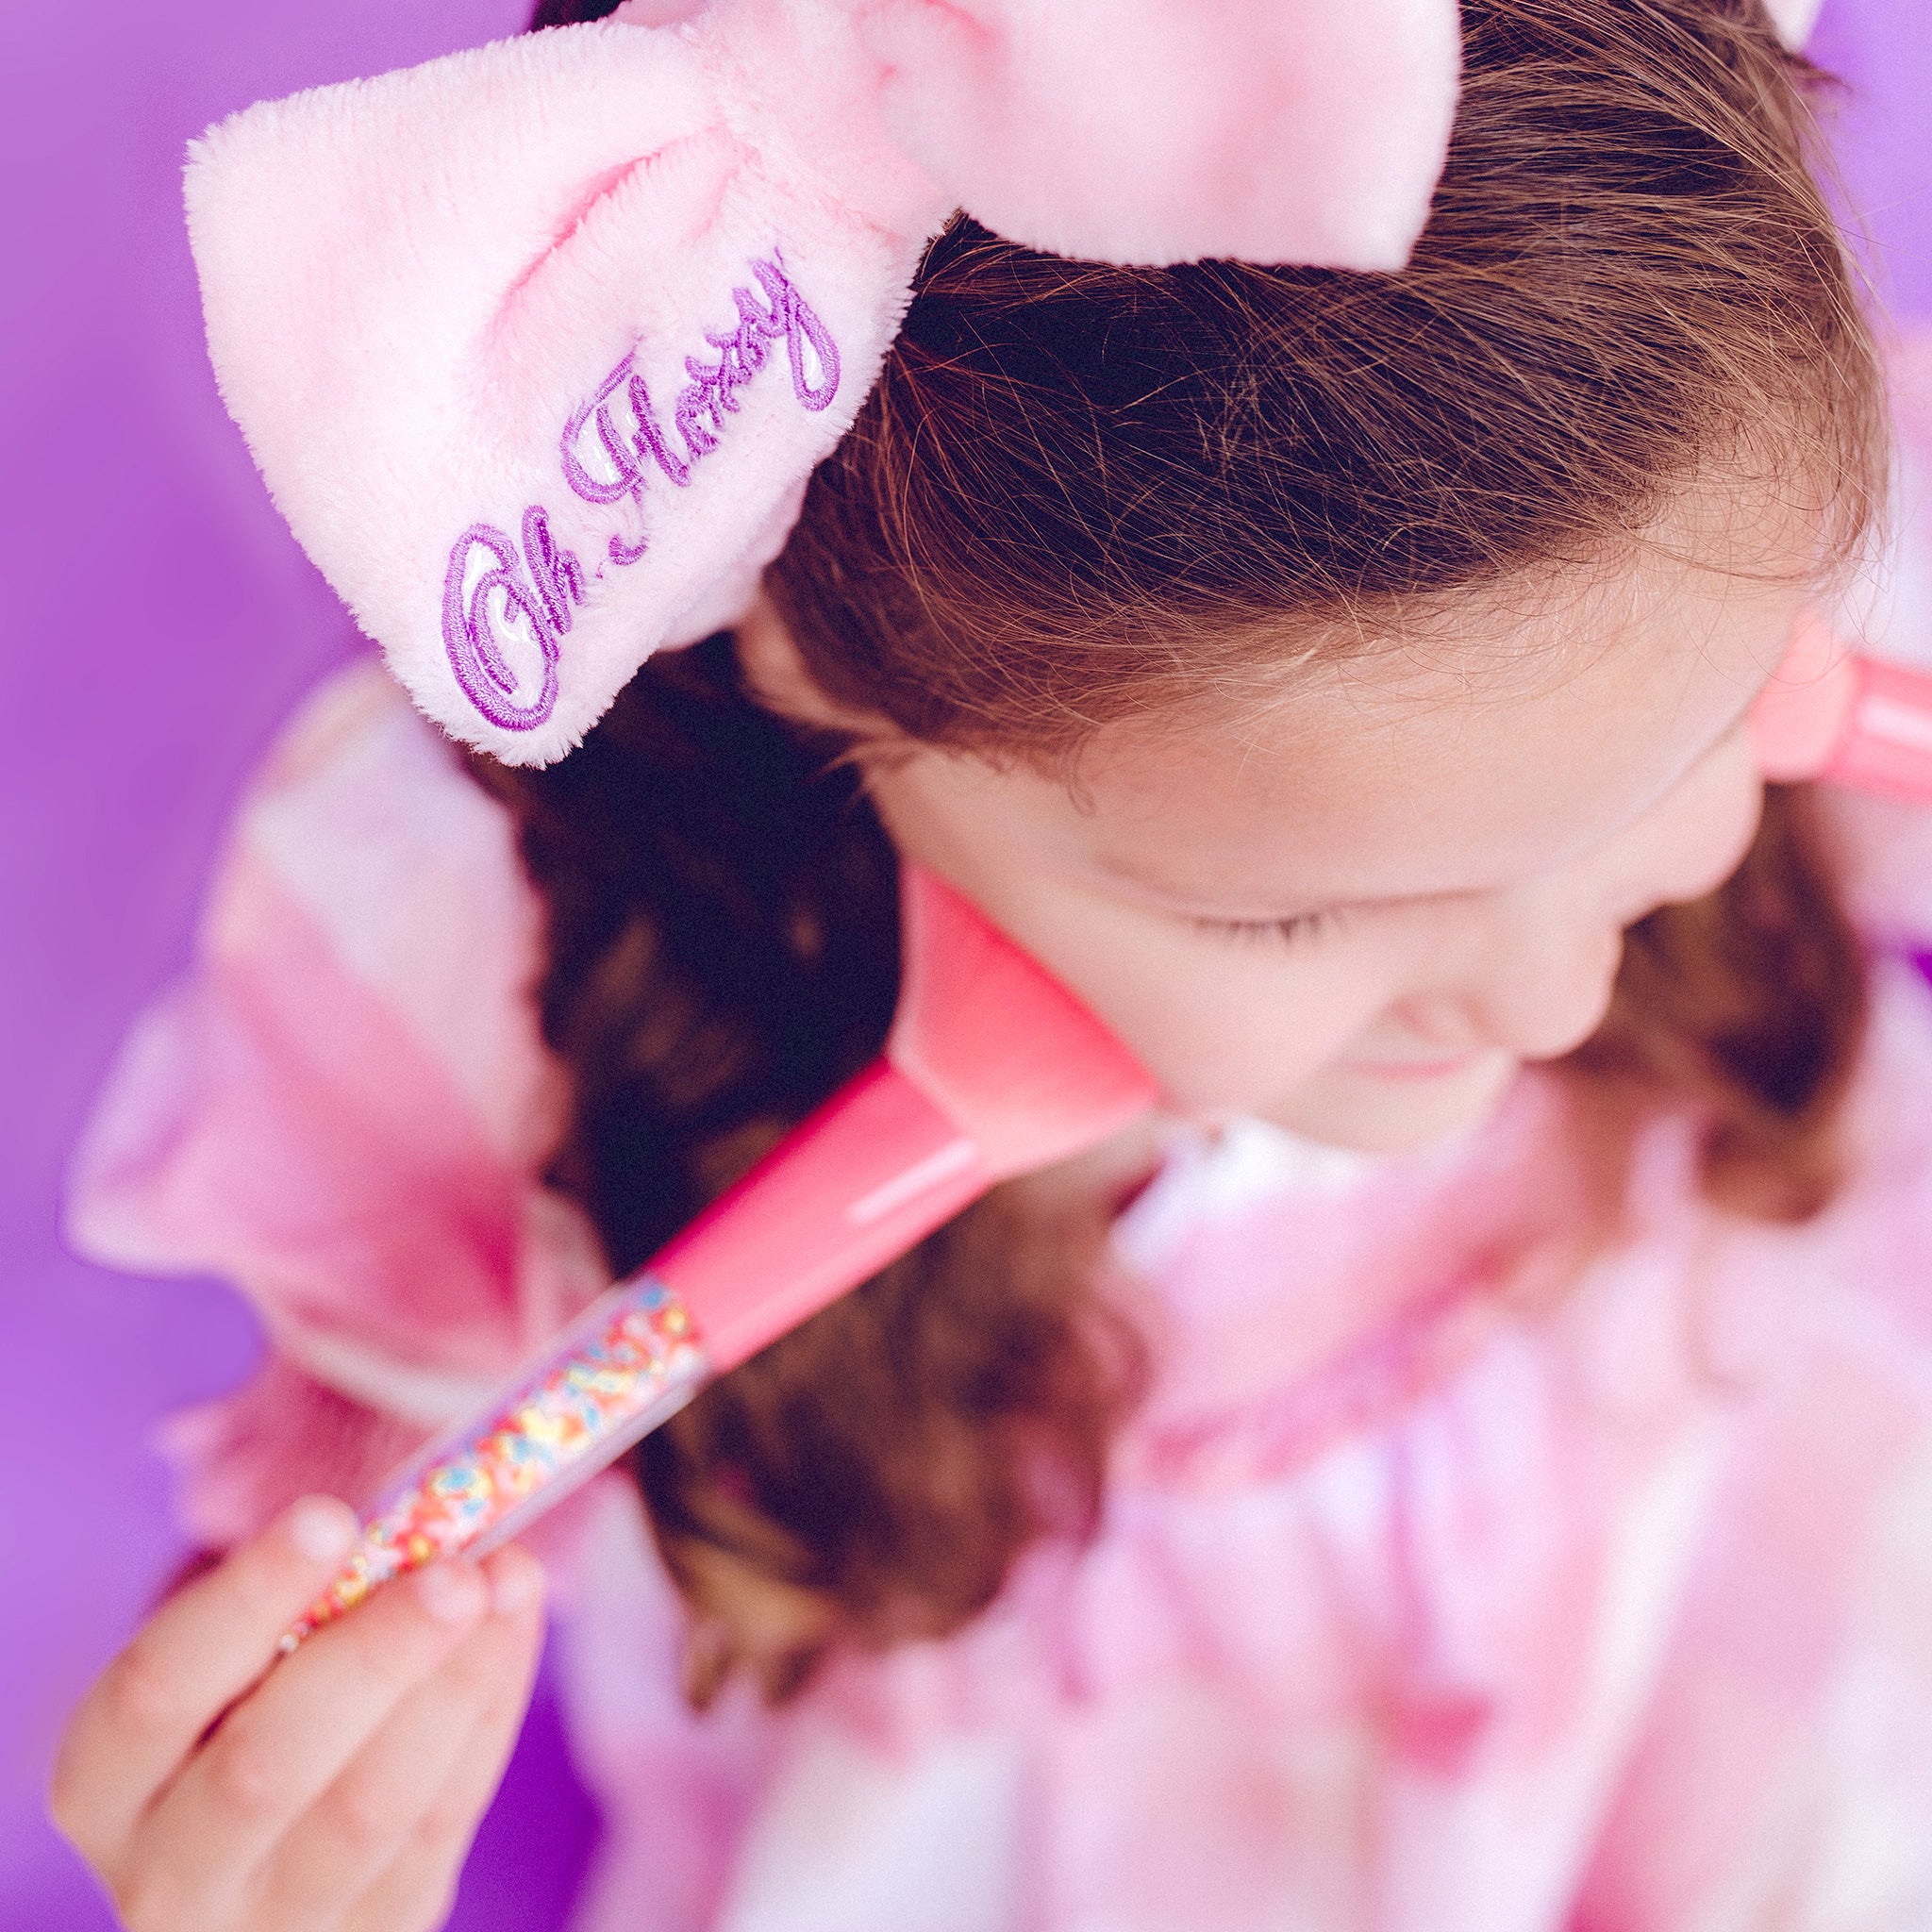       Oh-Flossy-Kids-Natural-Makeup-Sprinkle-brushes-and-headband